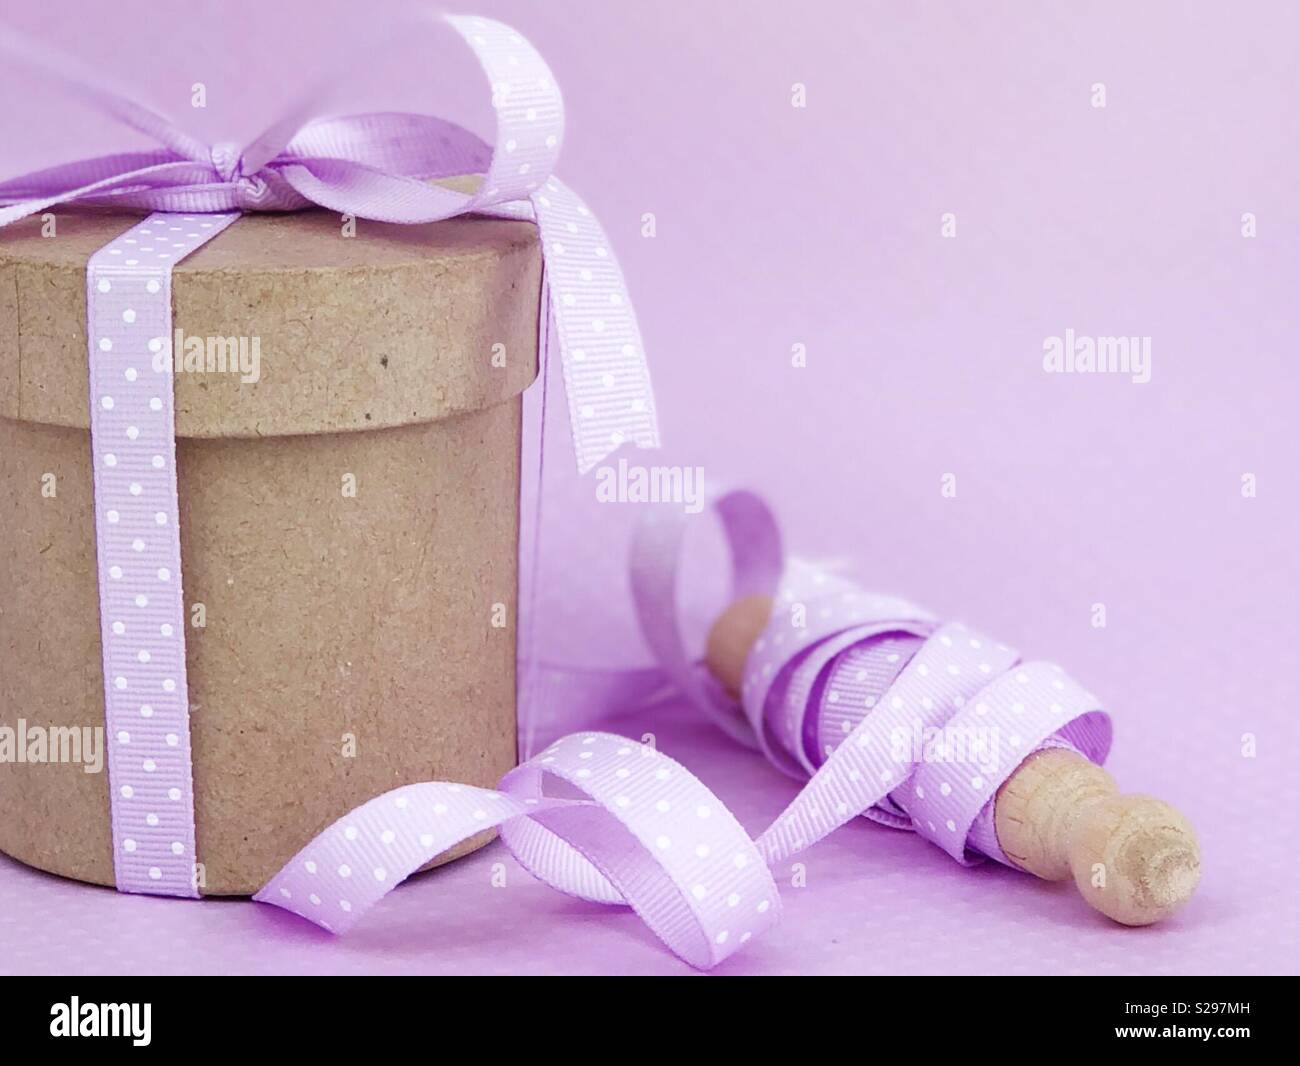 Kraft box and pastel purple ribbon. Purple back ground for color themed social media and/or online shop visual presence. Pretty image for small business owners with big dreams. Stock Photo